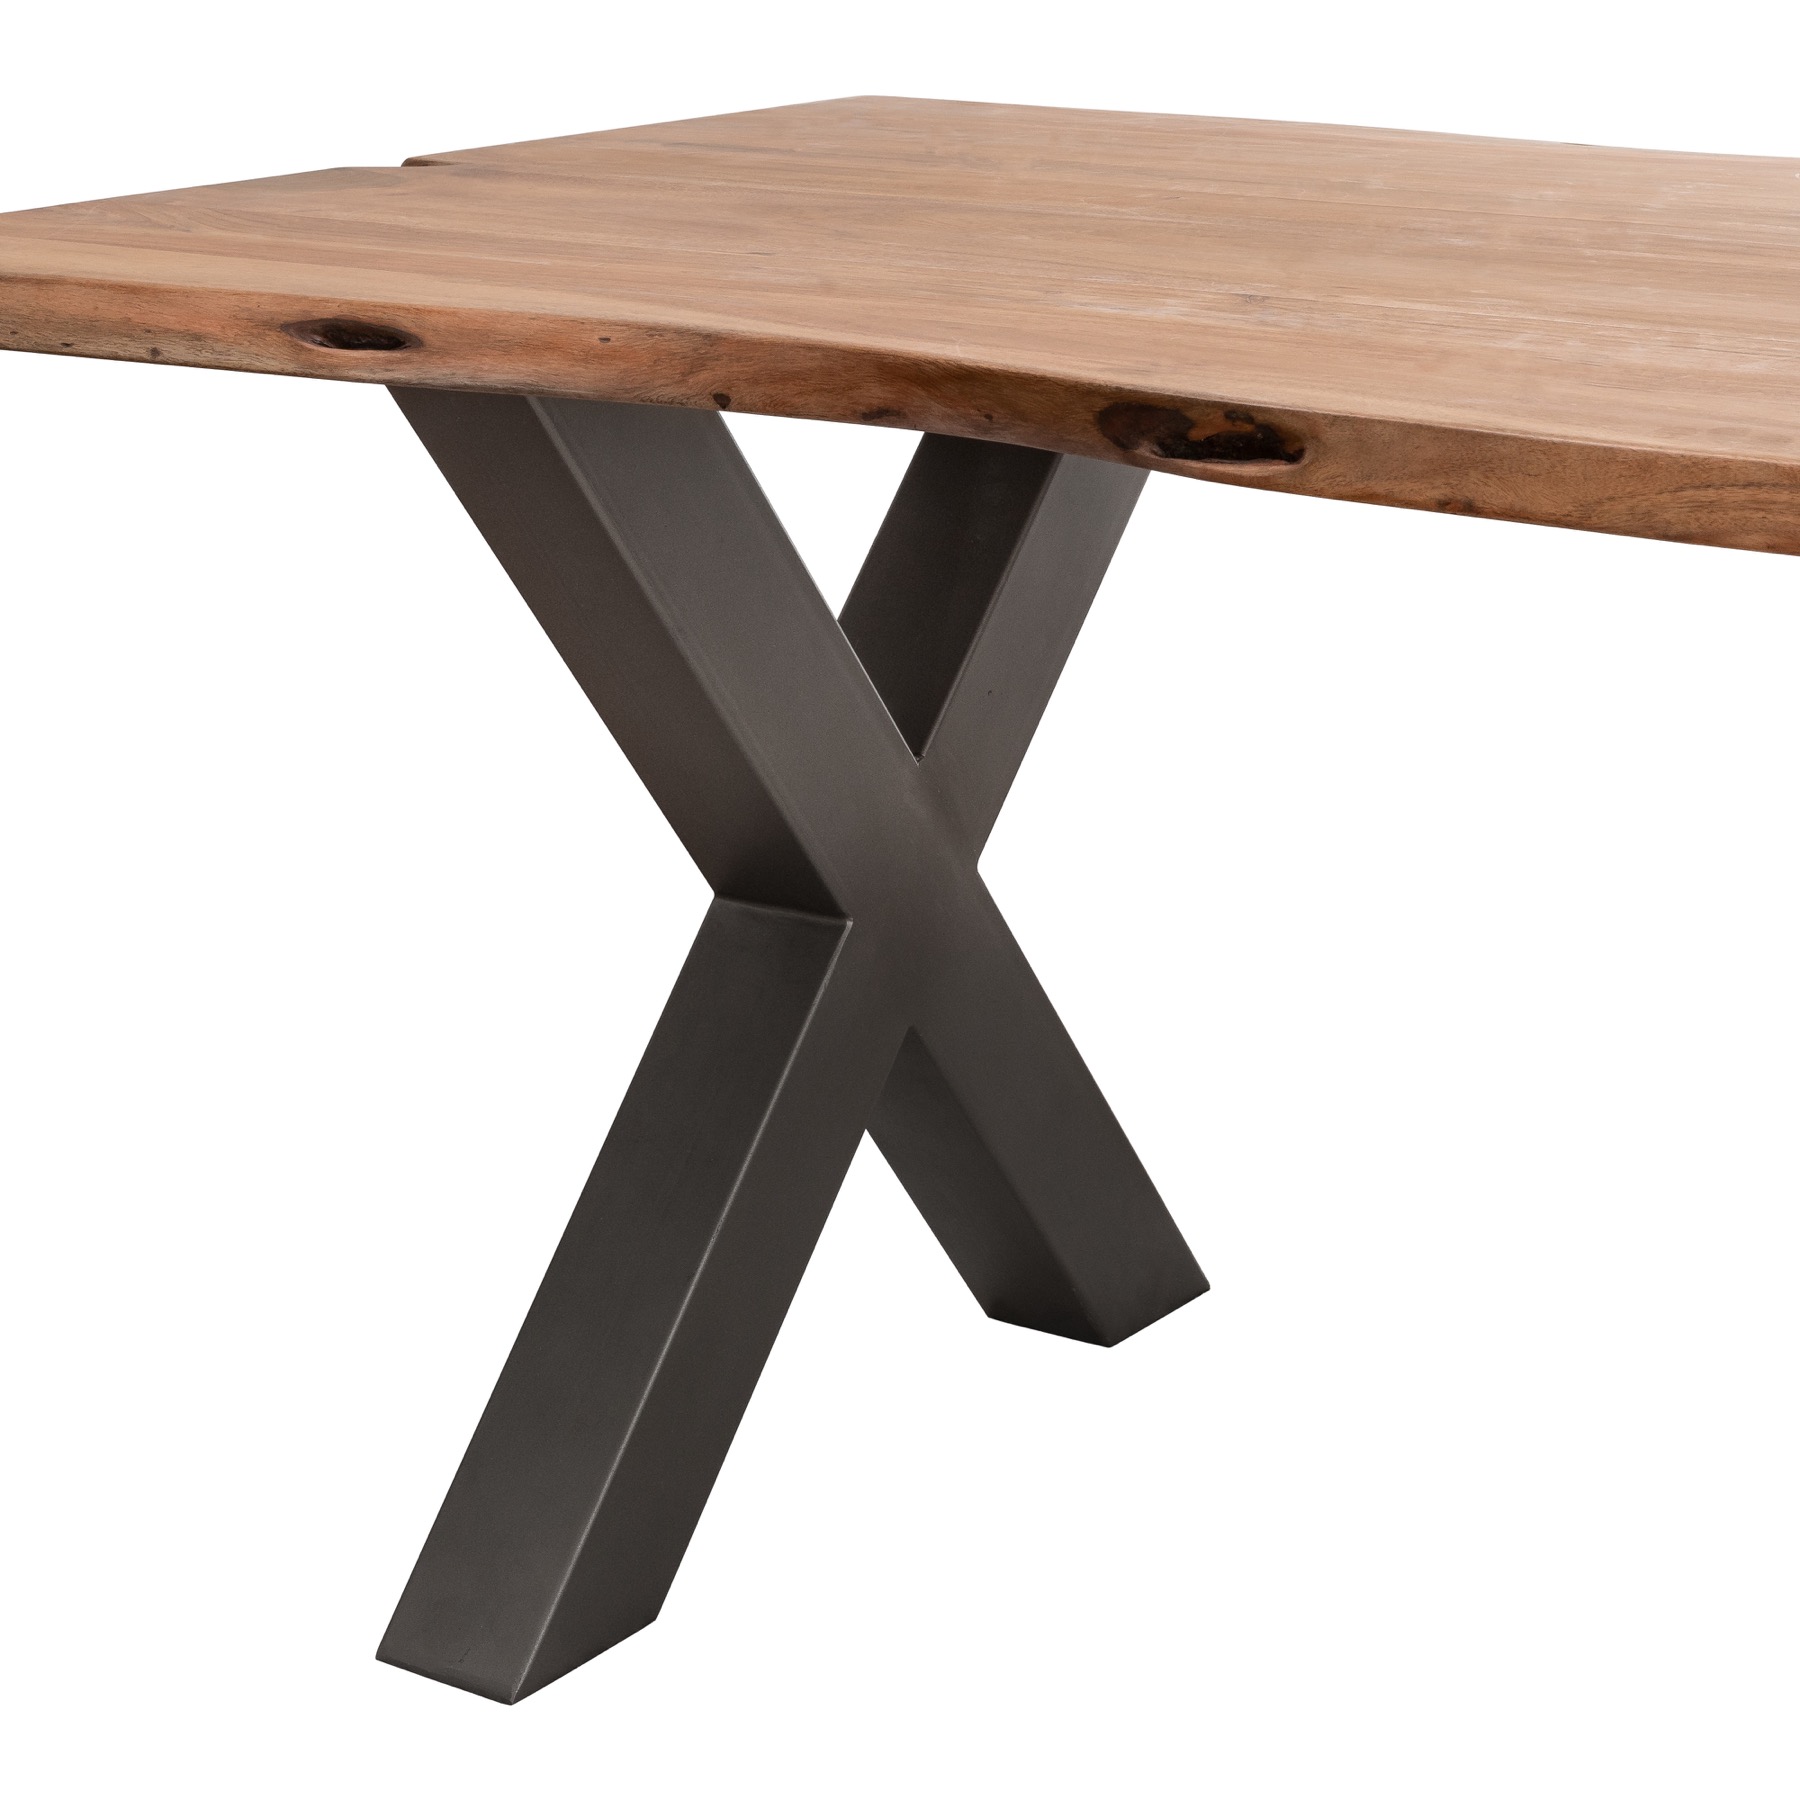 Live Edge Collection Dining Table - Image 3